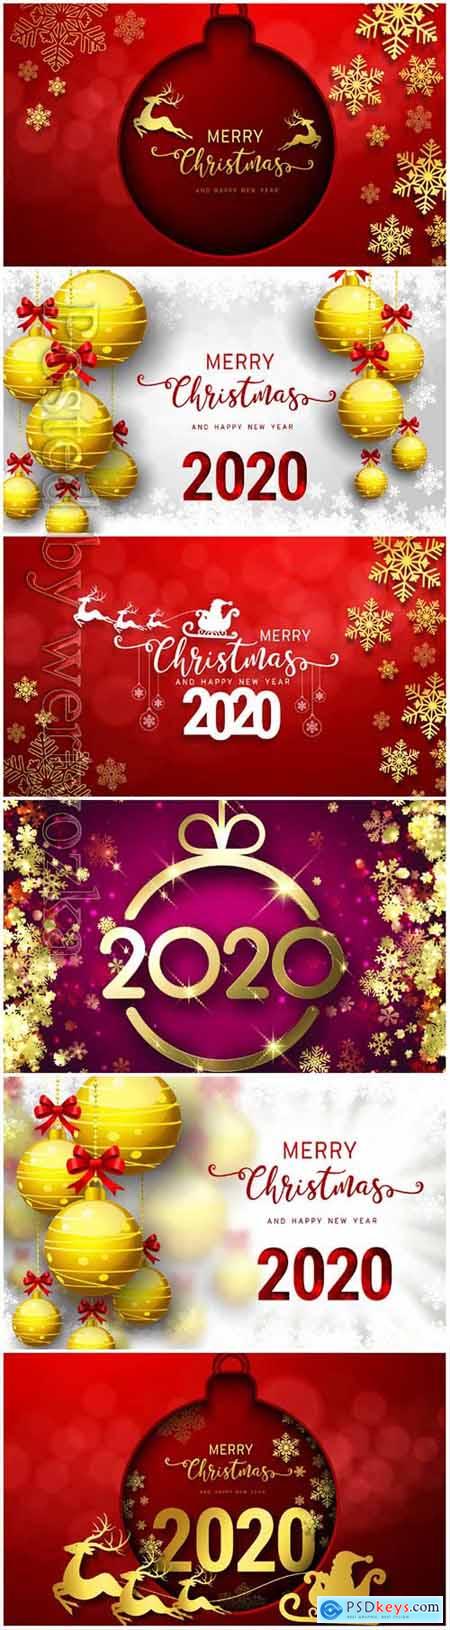 2020 Merry Chistmas and Happy New Year vector illustration # 11